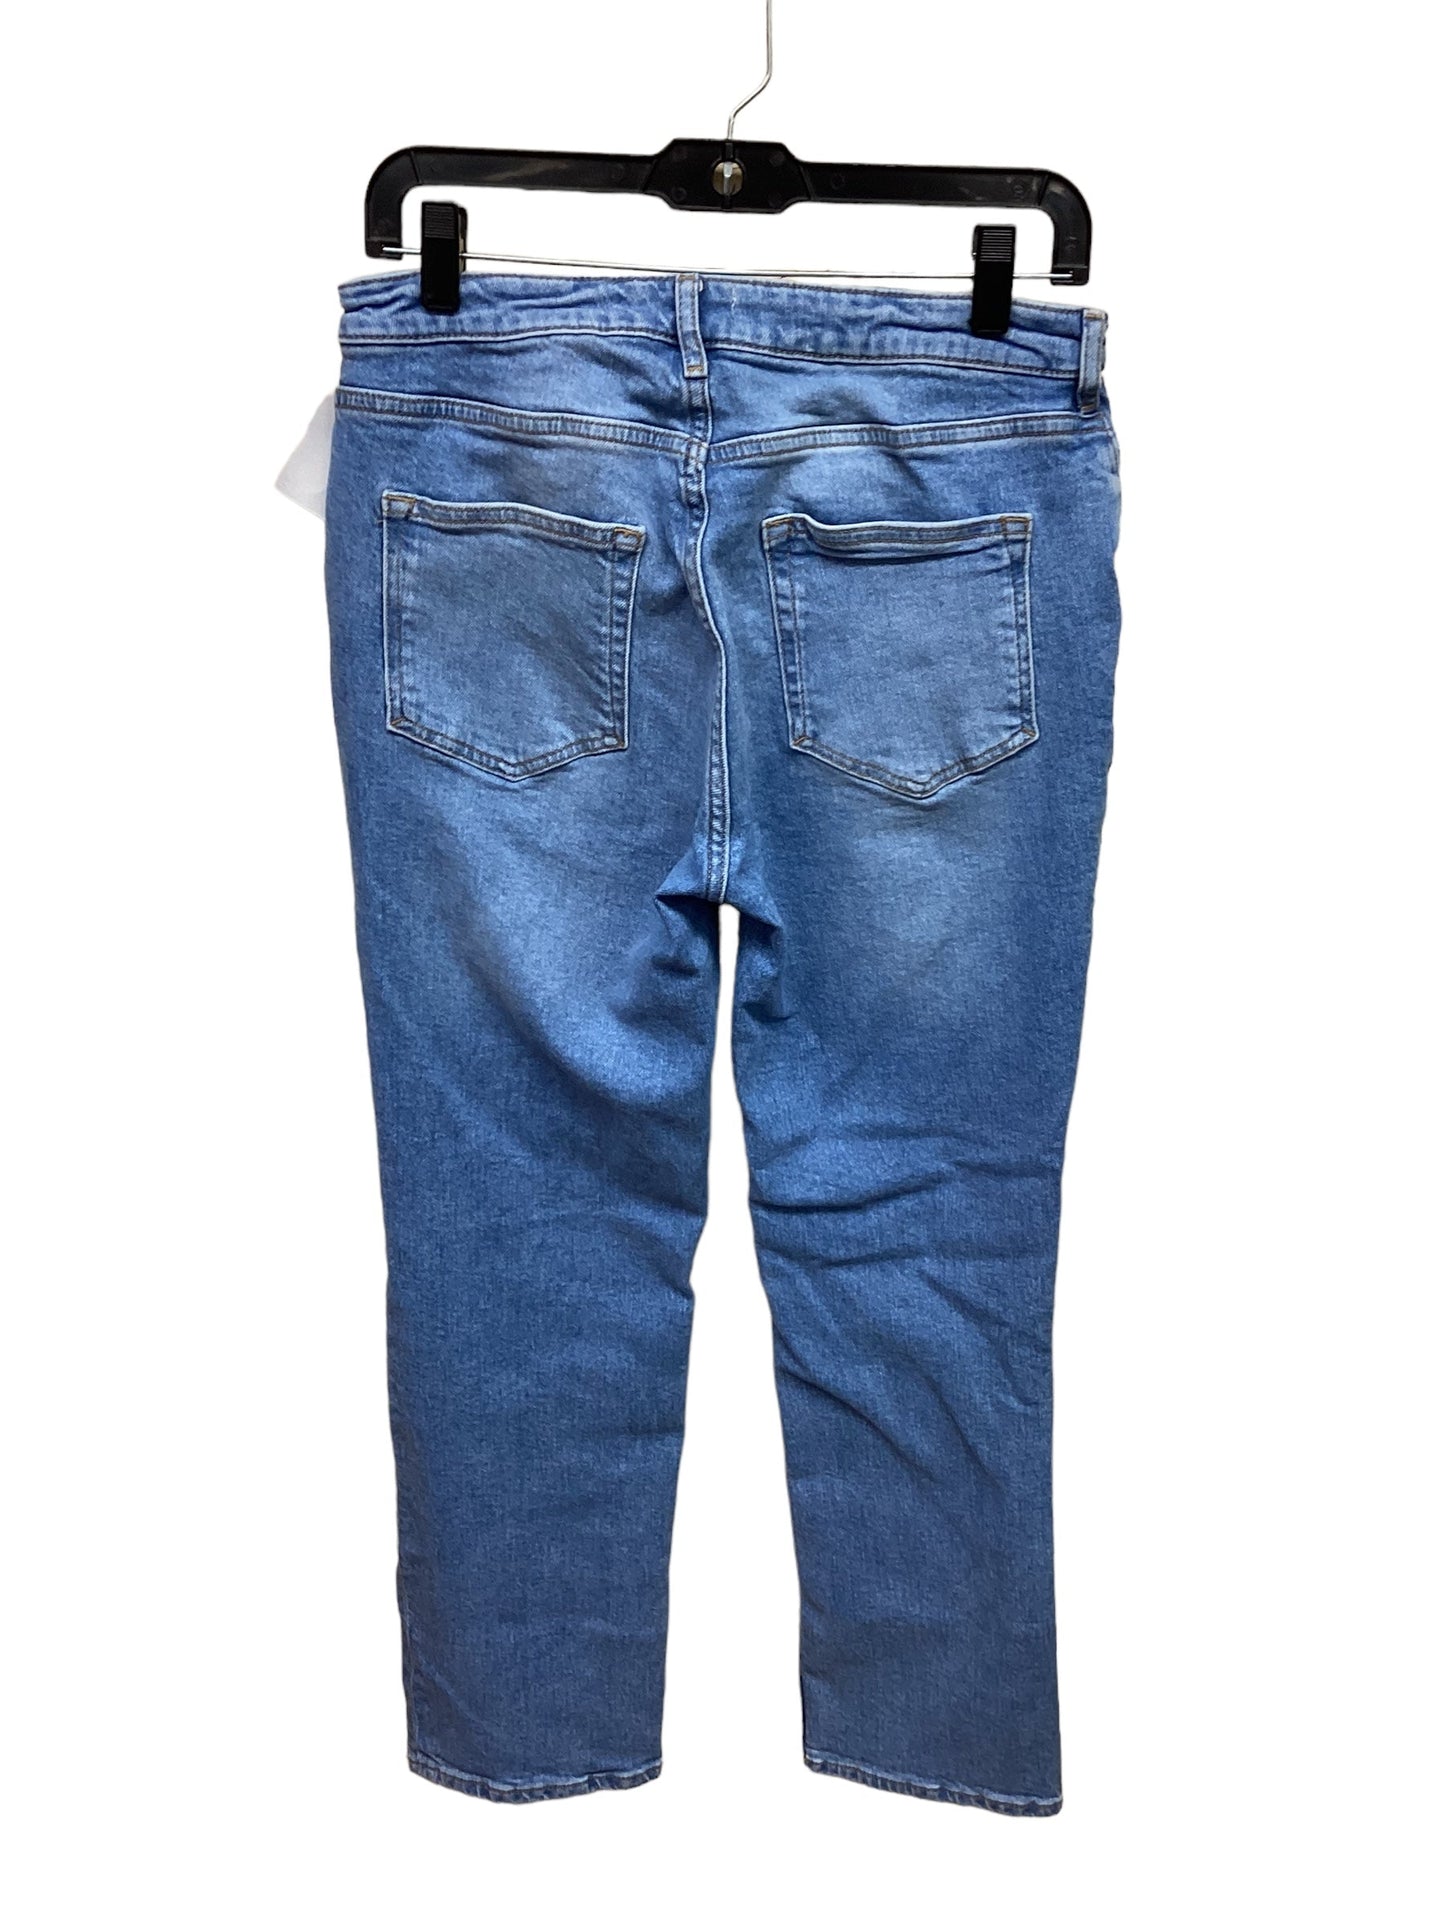 Jeans Straight By Pilcro  Size: 8